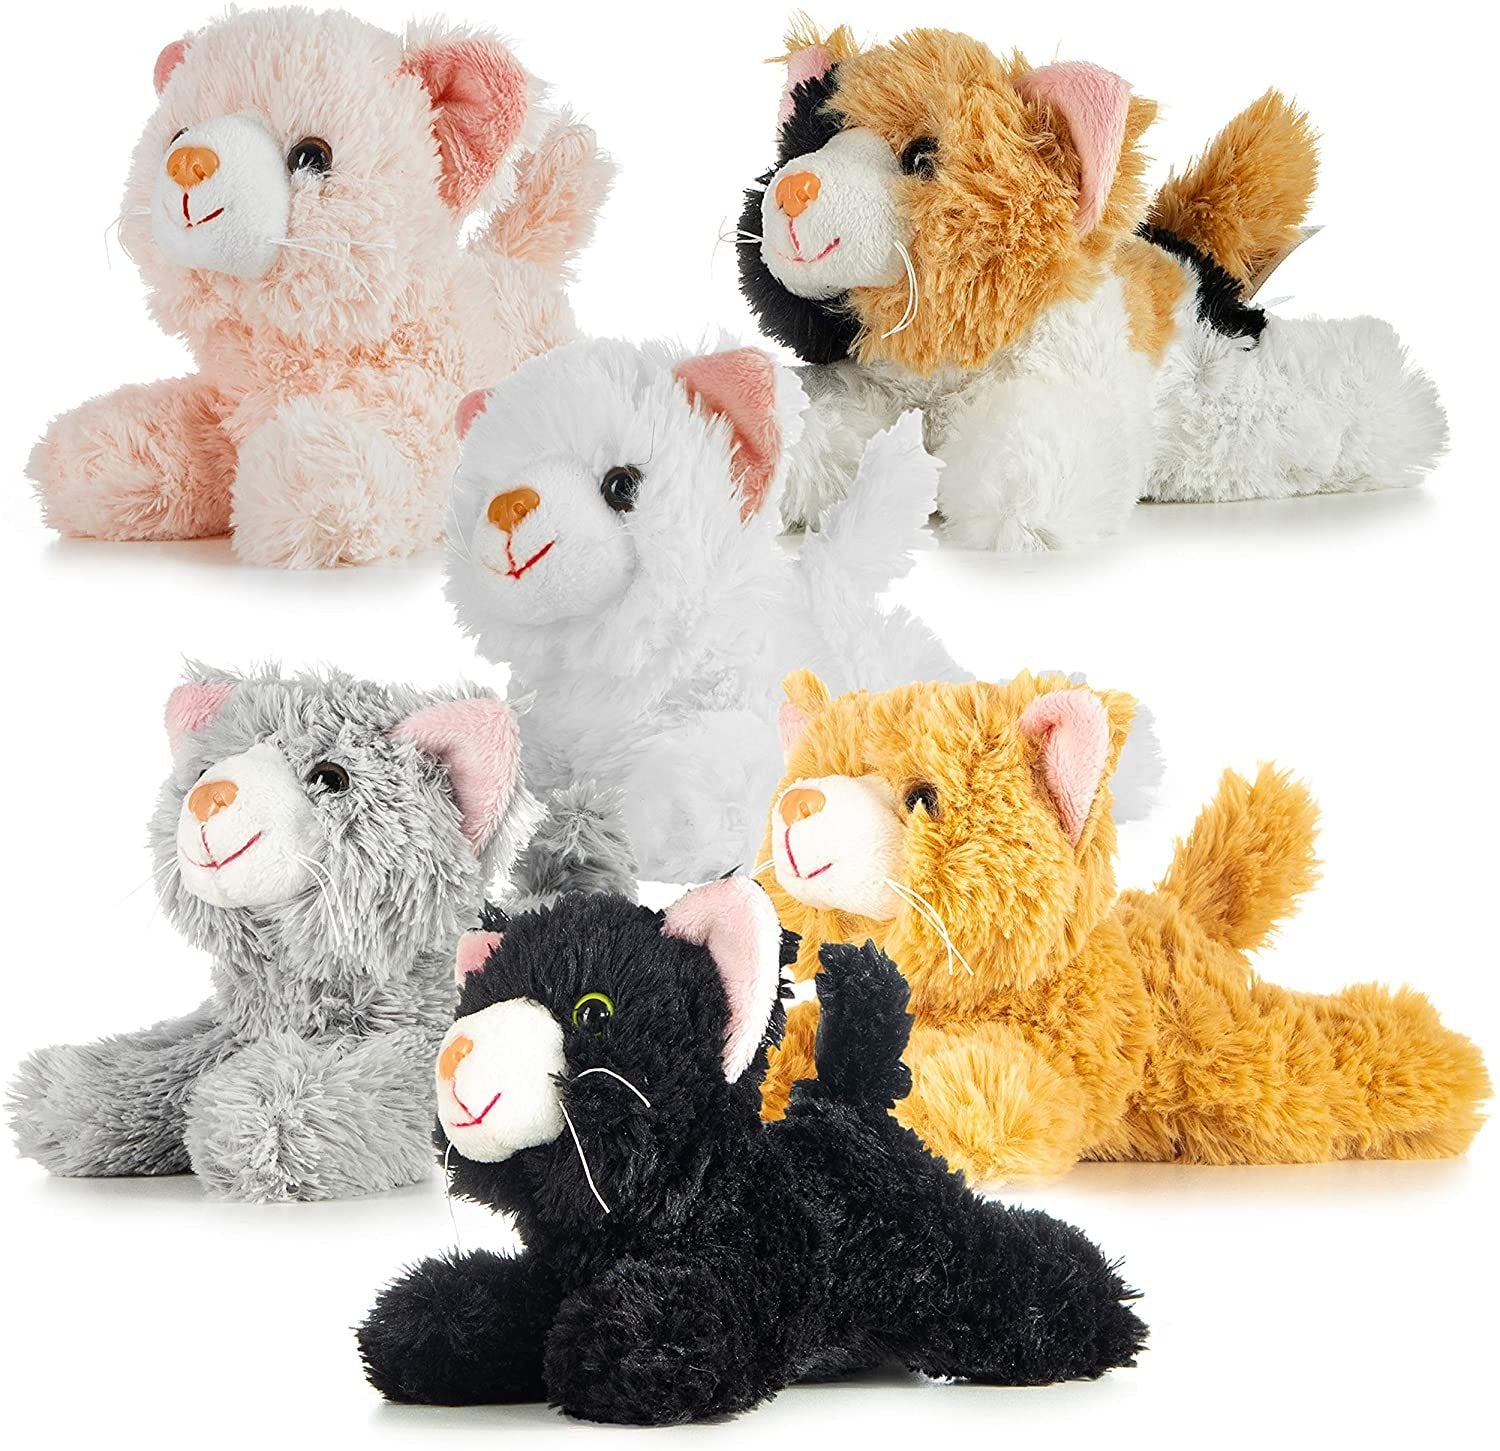 6 inch Multi-color Stuffed Cats - Pack of 6 Plush Kittens Toys for Baby Boys/Girls